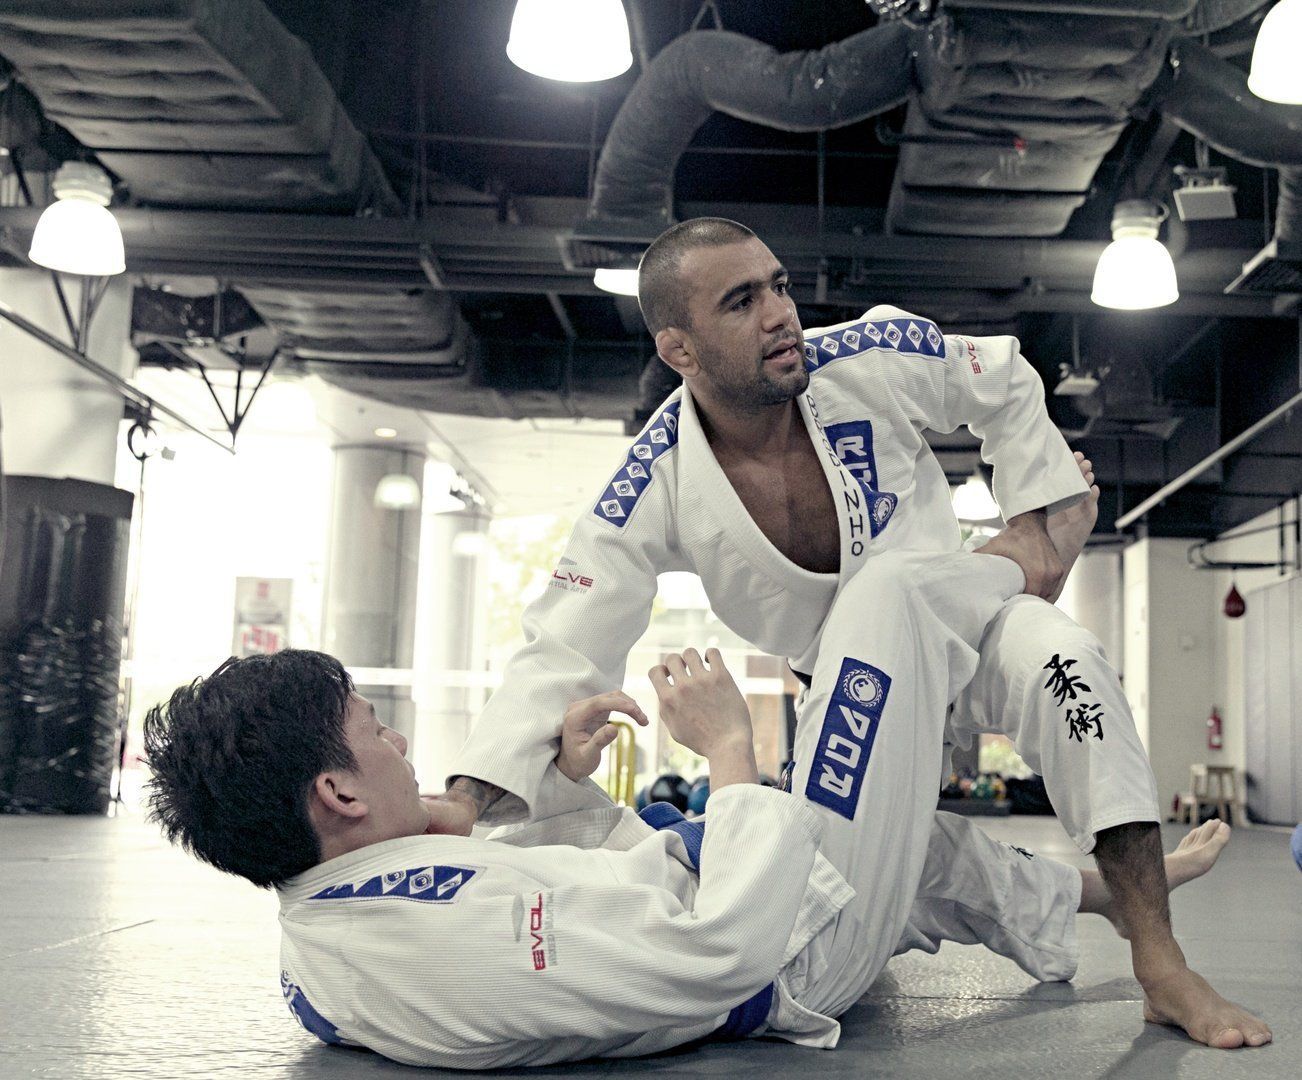 BJJ World Champion and UFC Fighter "Brodinho" Issa has been practicing BJJ for over 15 years. 